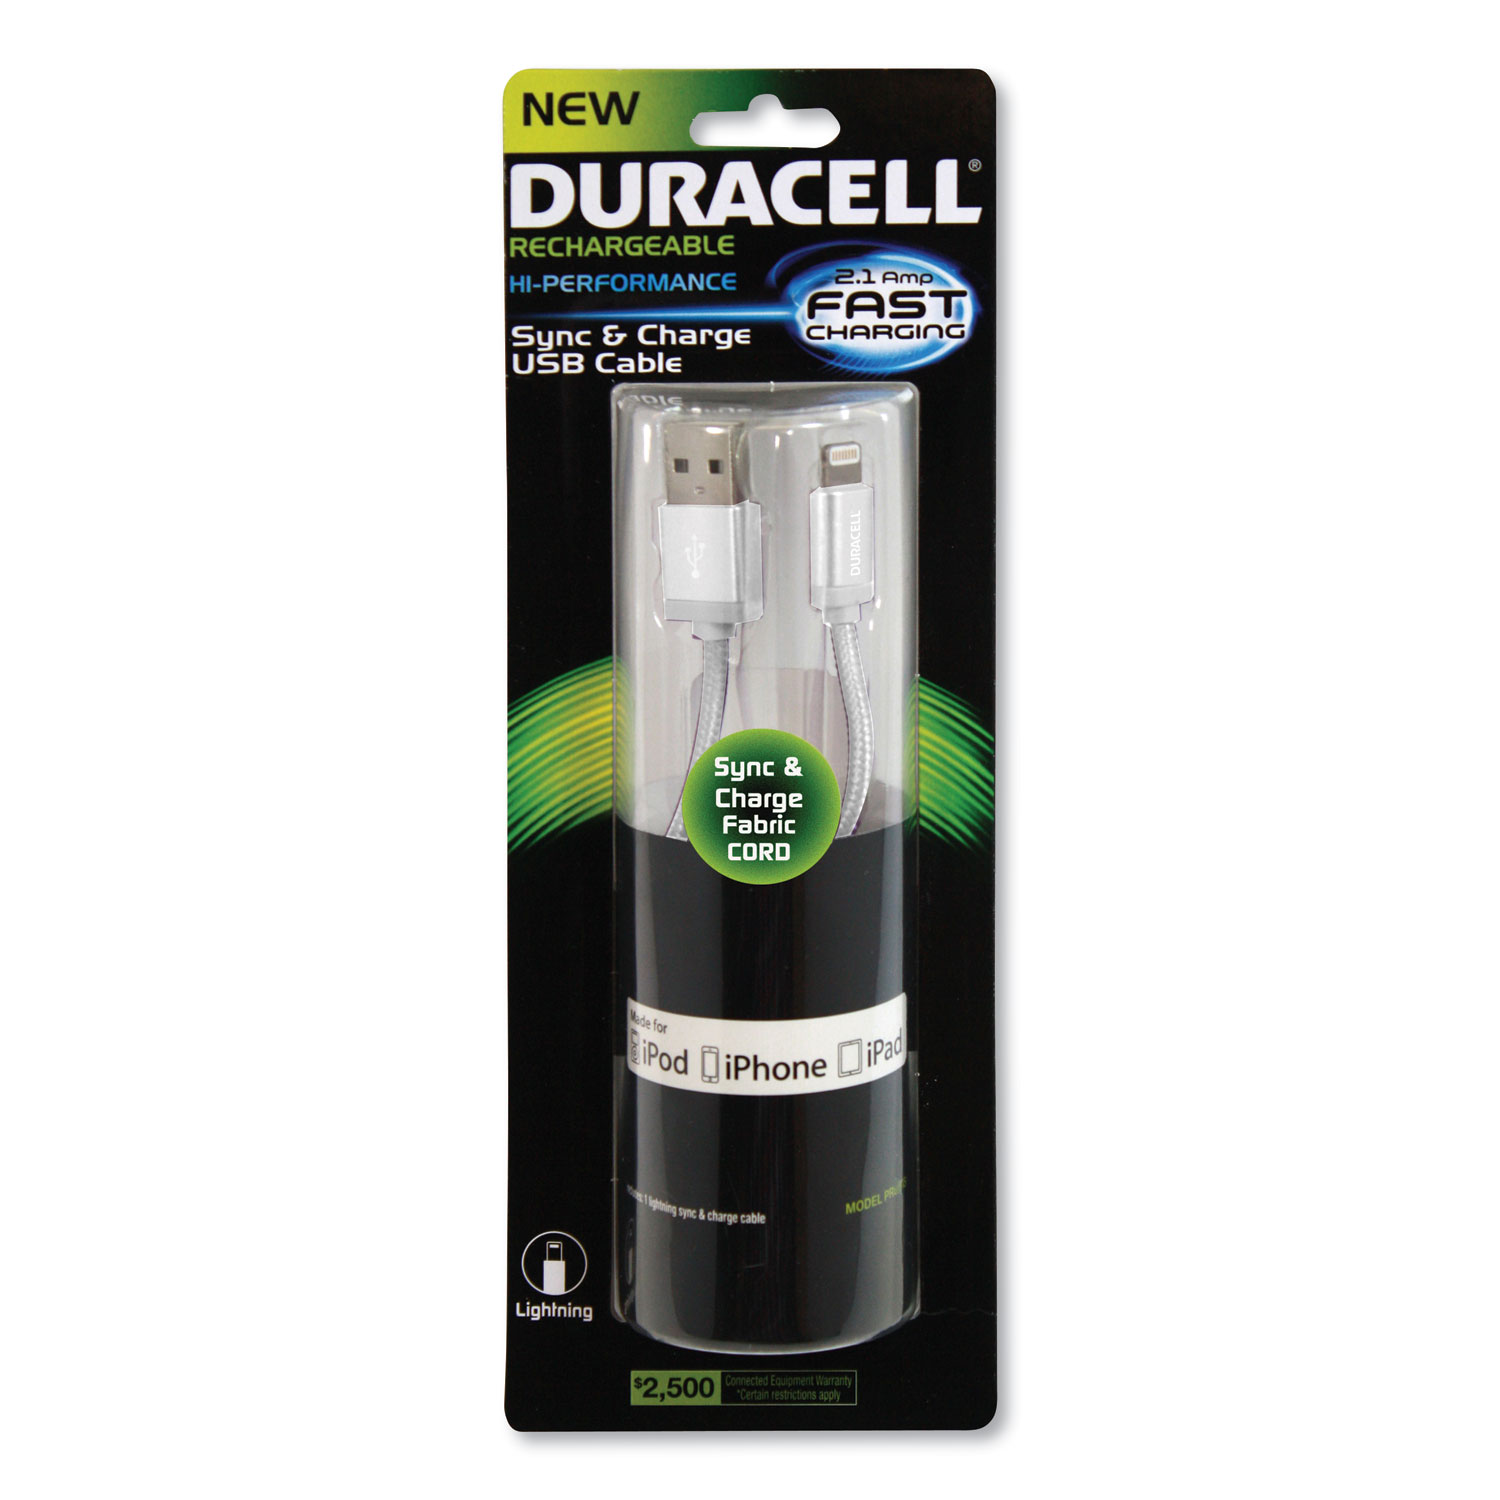  Duracell PRO926 Hi-Performance Sync And Charge Cable for iPad; iPhone; iPod, Apple Lightning, 3 ft, White (ECAPRO926) 